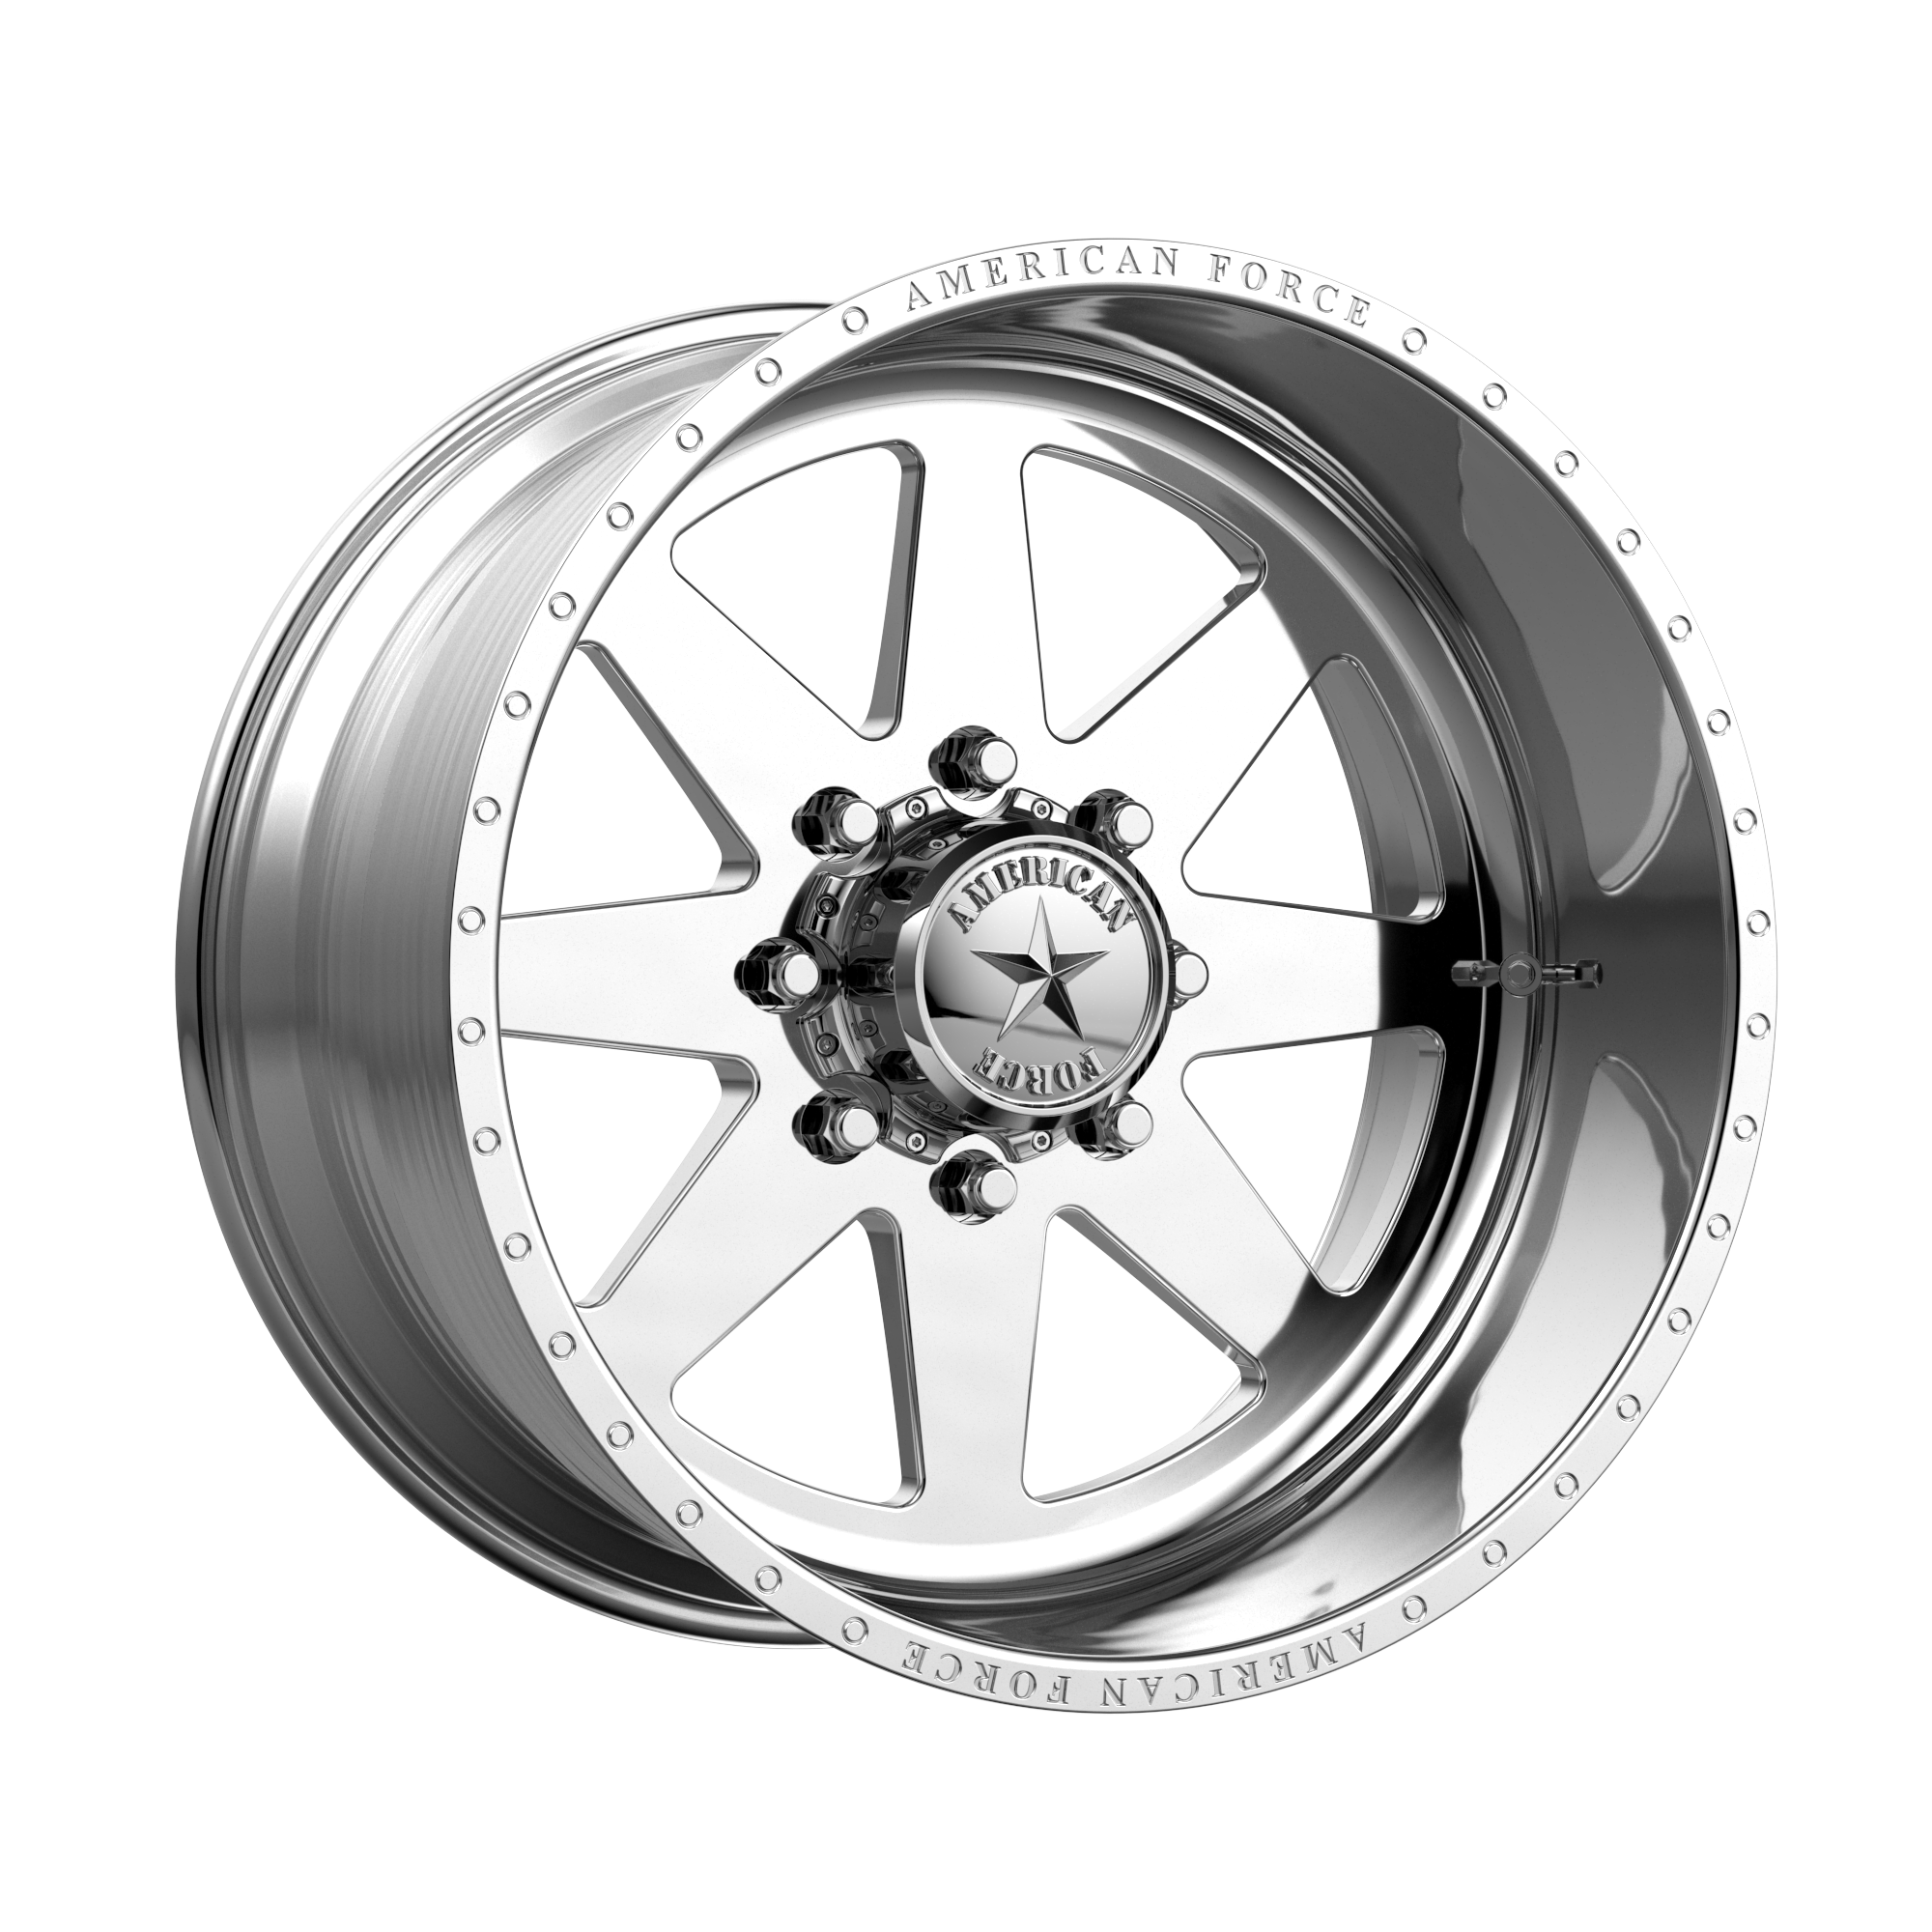 INDEPENDENCE SS 20x14 8x165.10 POLISHED (-73 mm) - Tires and Engine Performance